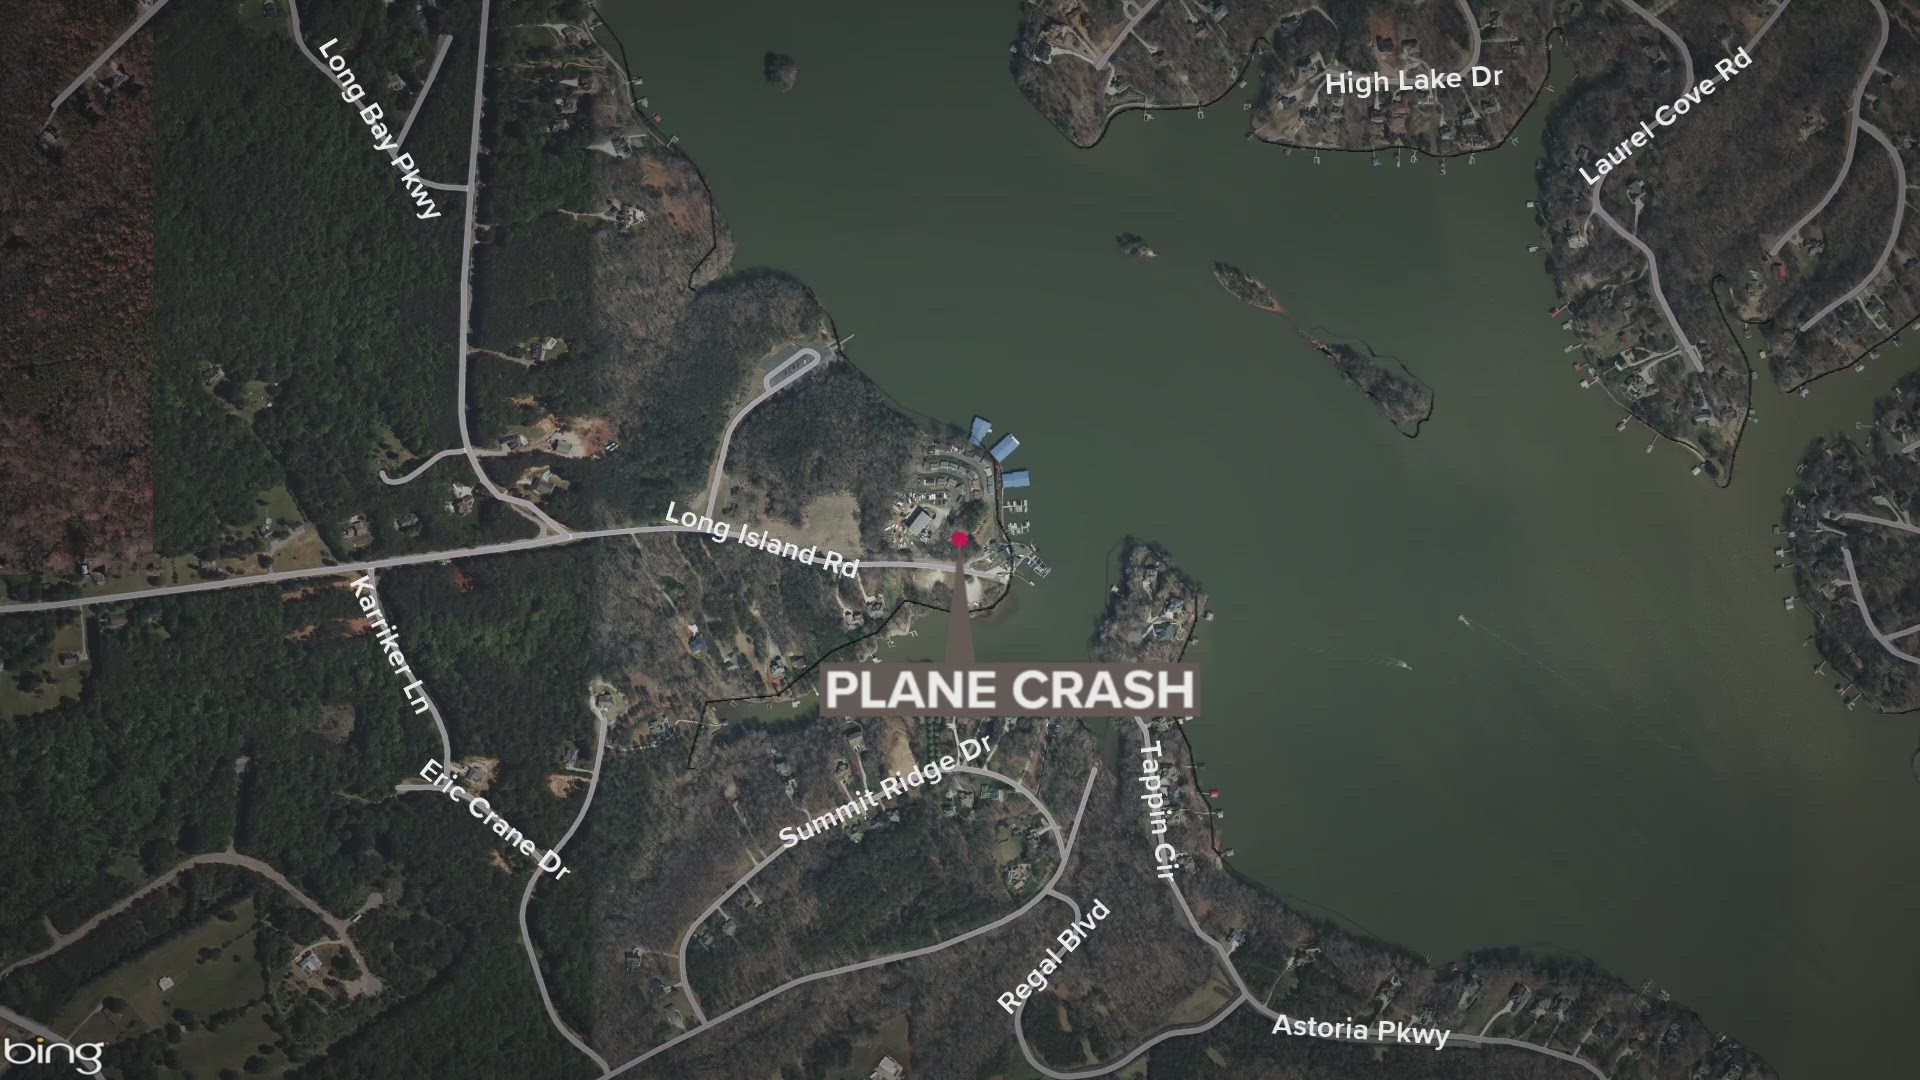 The pilot was able to safely land the plane on the water near Long Island Marina.